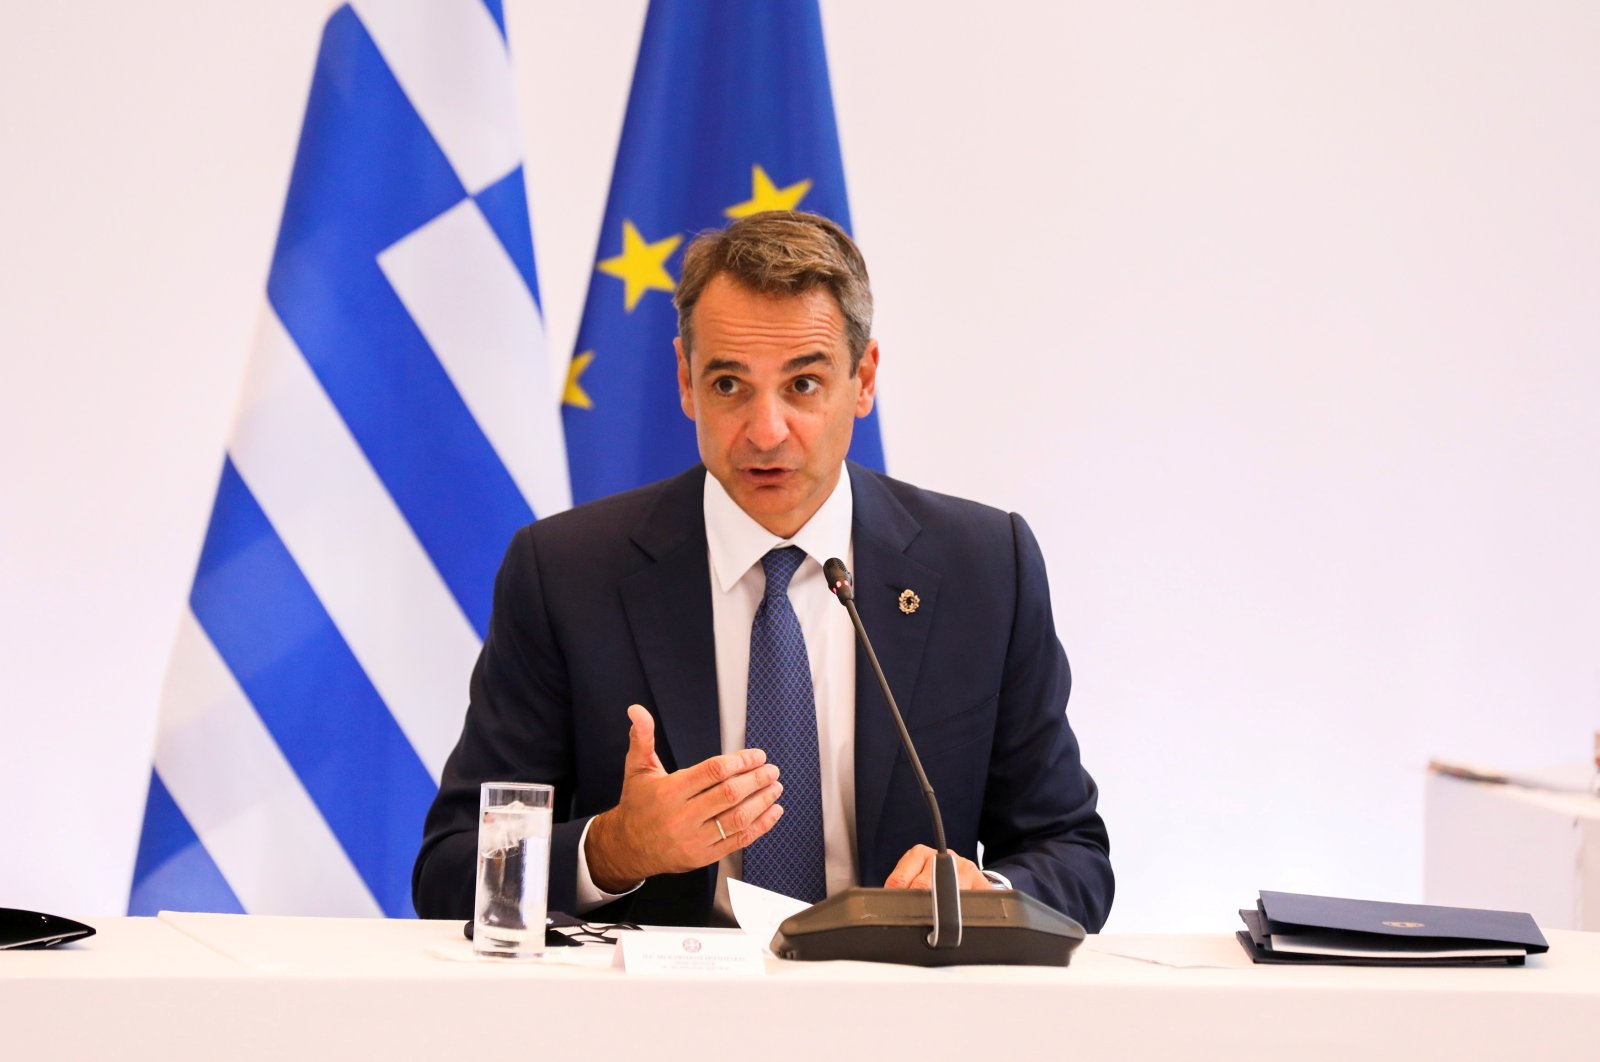 Greek Prime Minister Kyriakos Mitsotakis speaks during a Trilateral Meeting between Greece, Cyprus and Jordan, in Athens, Greece, July 28, 2021. (Reuters Photo)